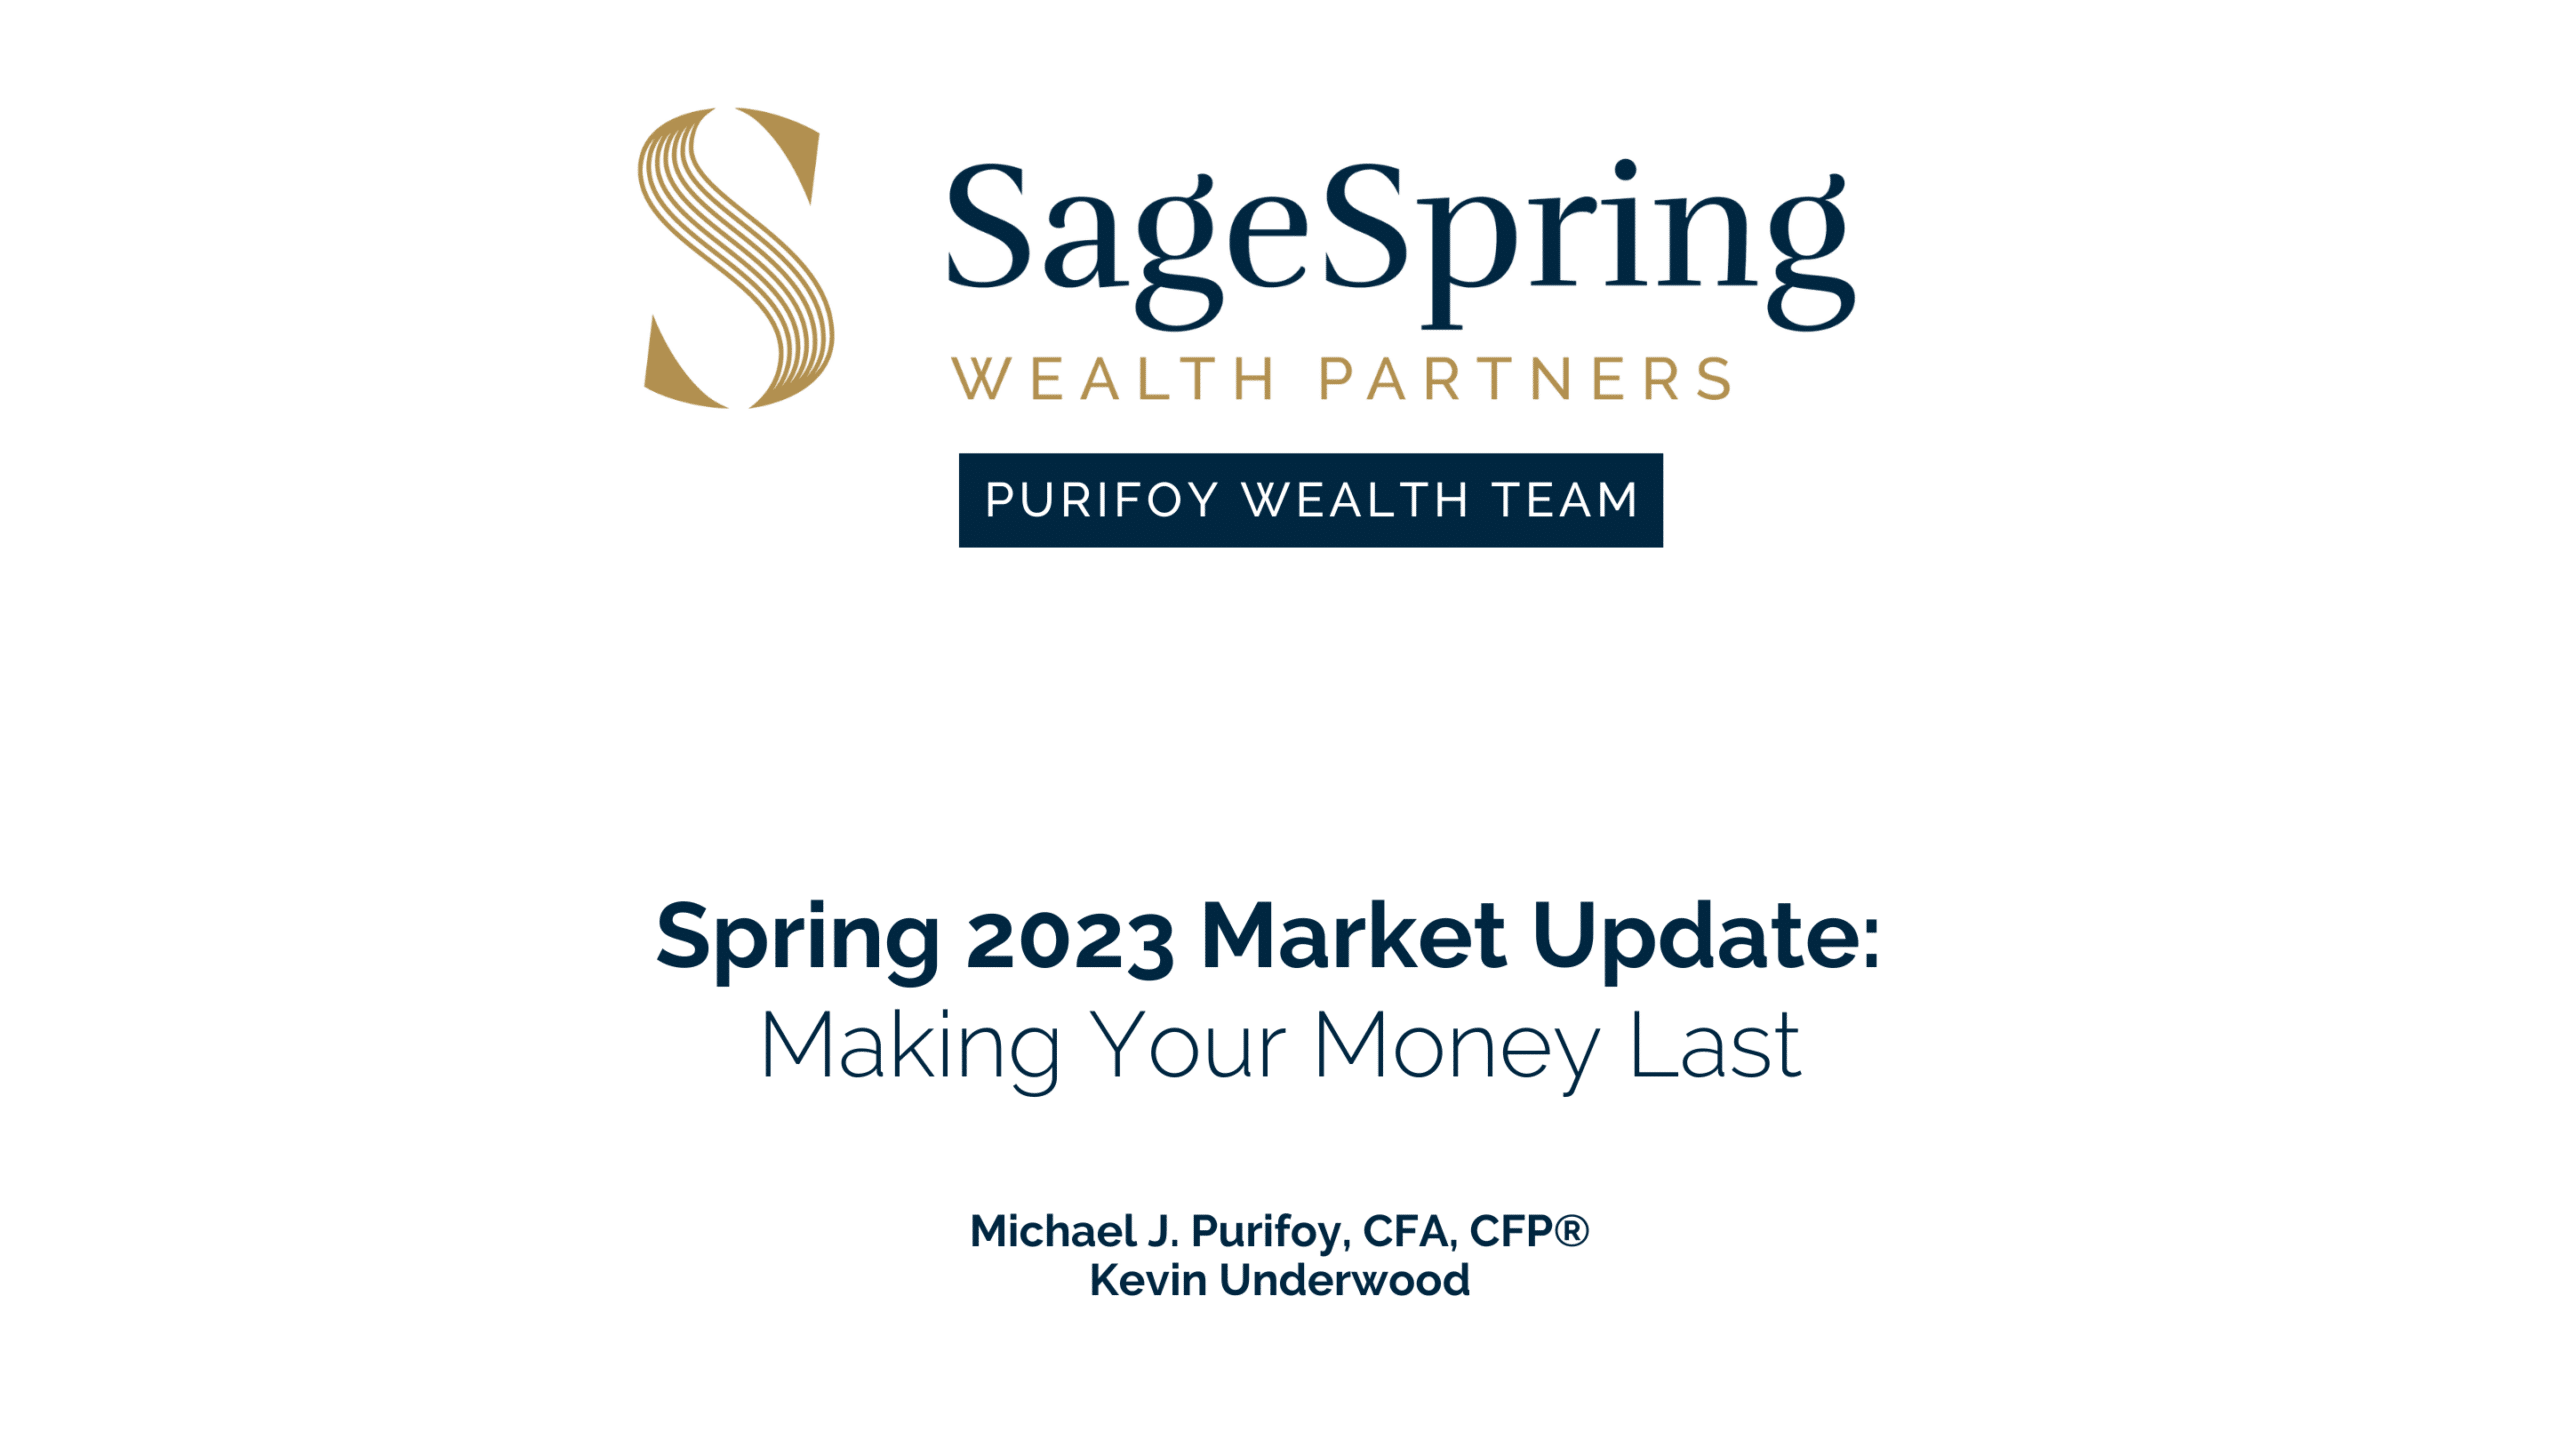 Spring 2023 market update from SageSpring Wealth Partners' Purifoy Team